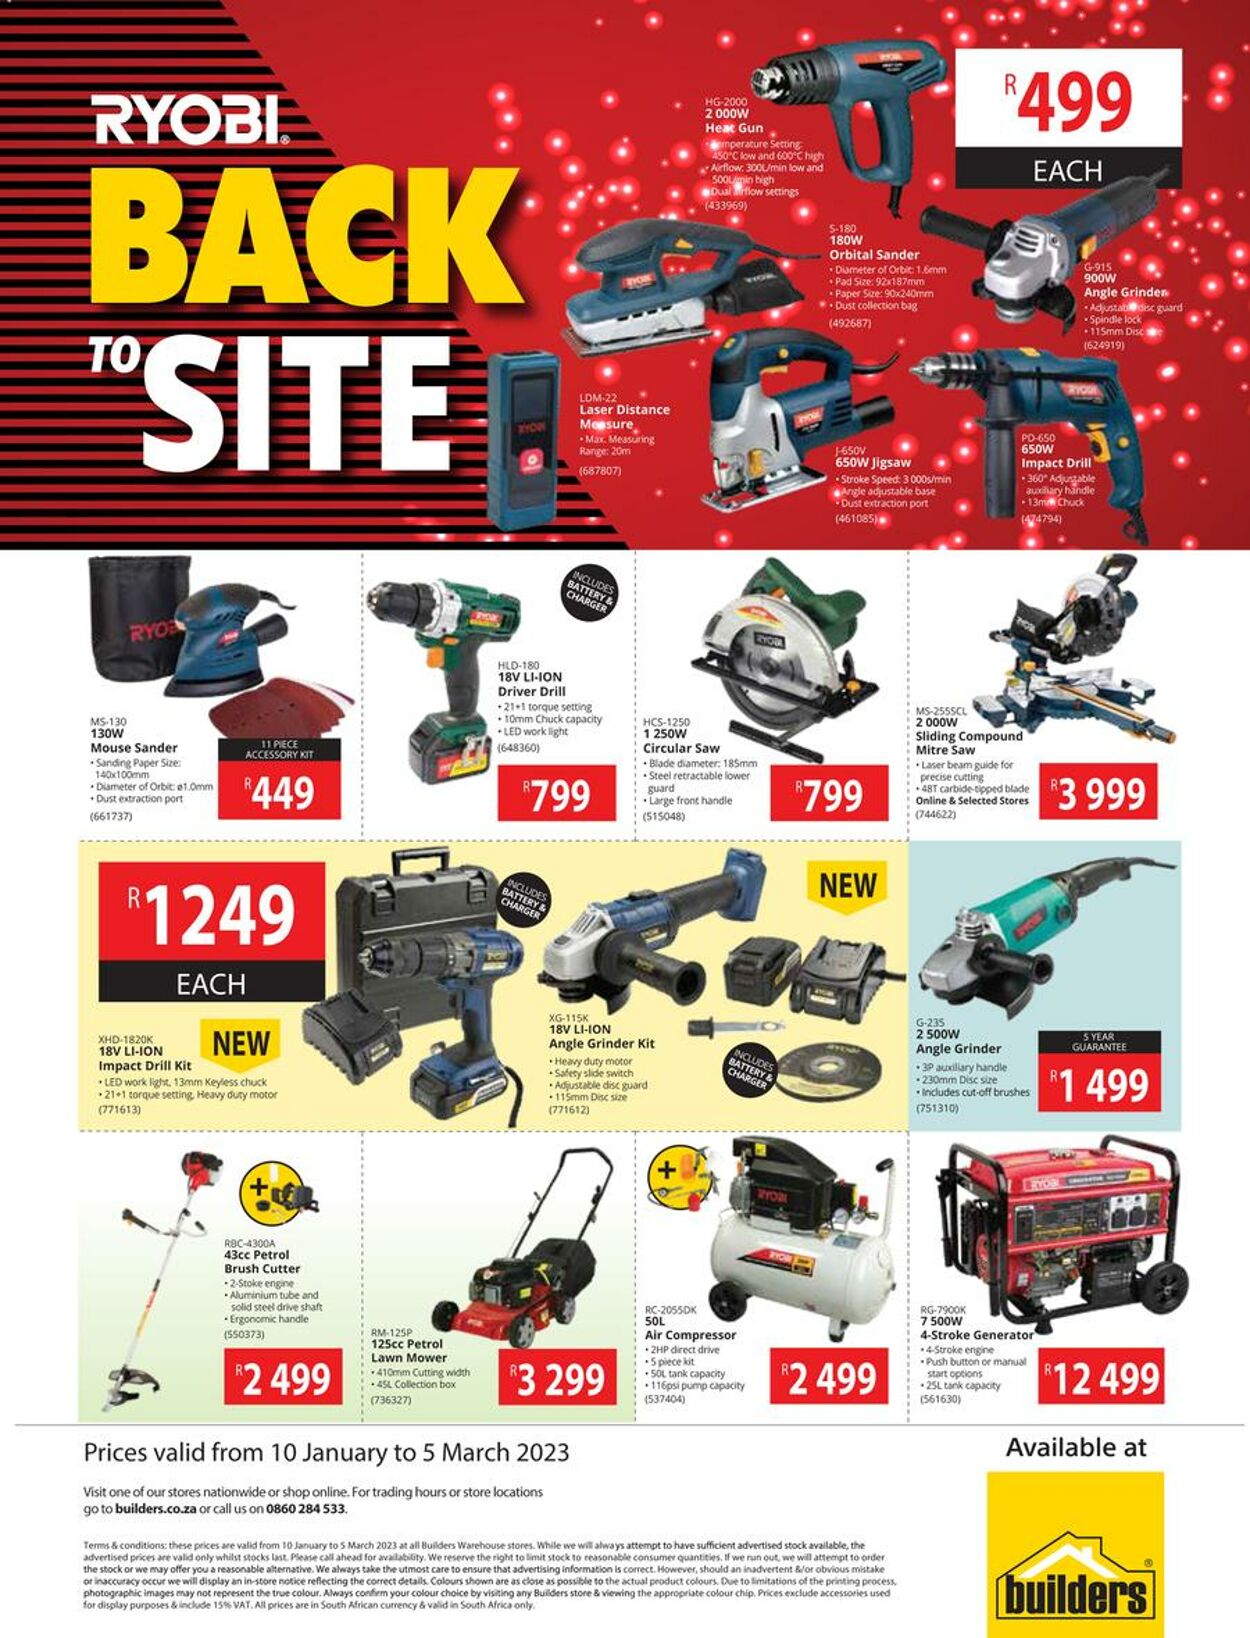 Special Builders Warehouse 10.01.2023-05.03.2023